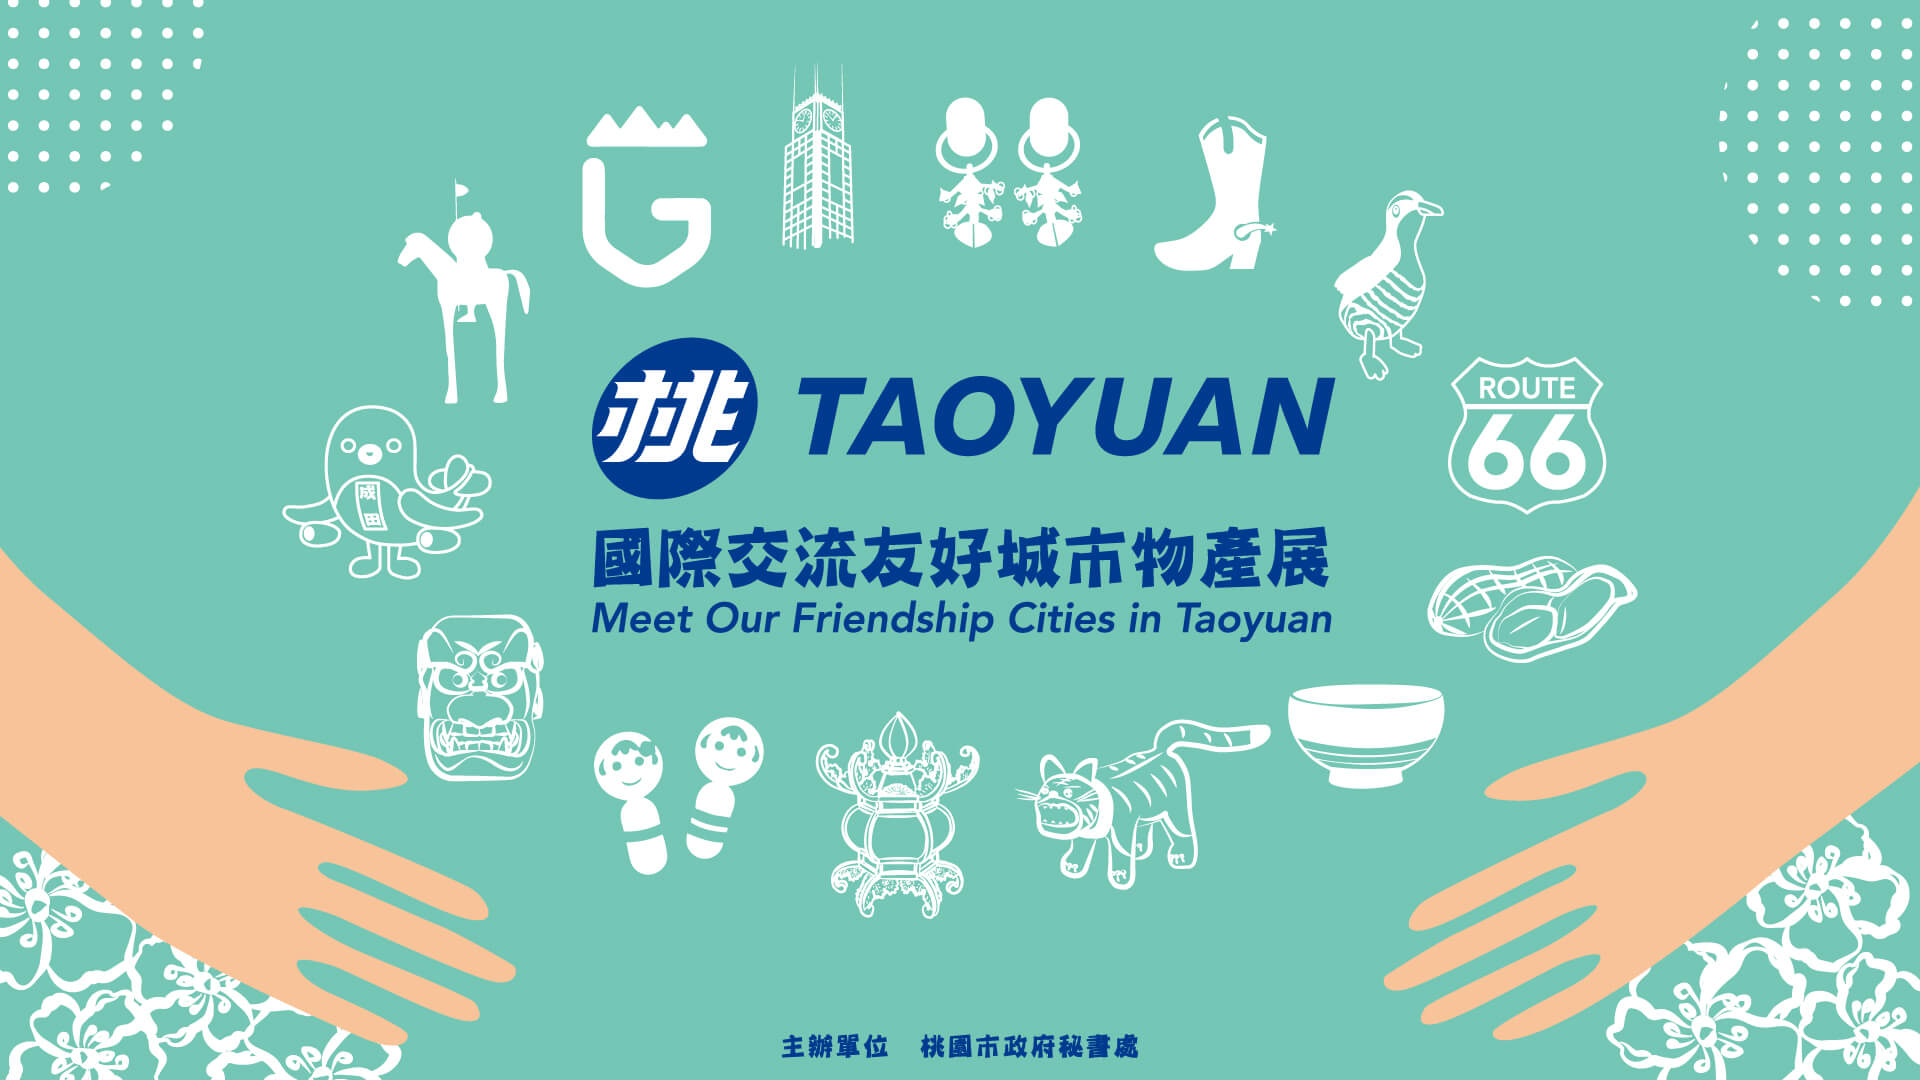 "Meet Our Friendship Cities in Taoyuan" Exhibition-圖片